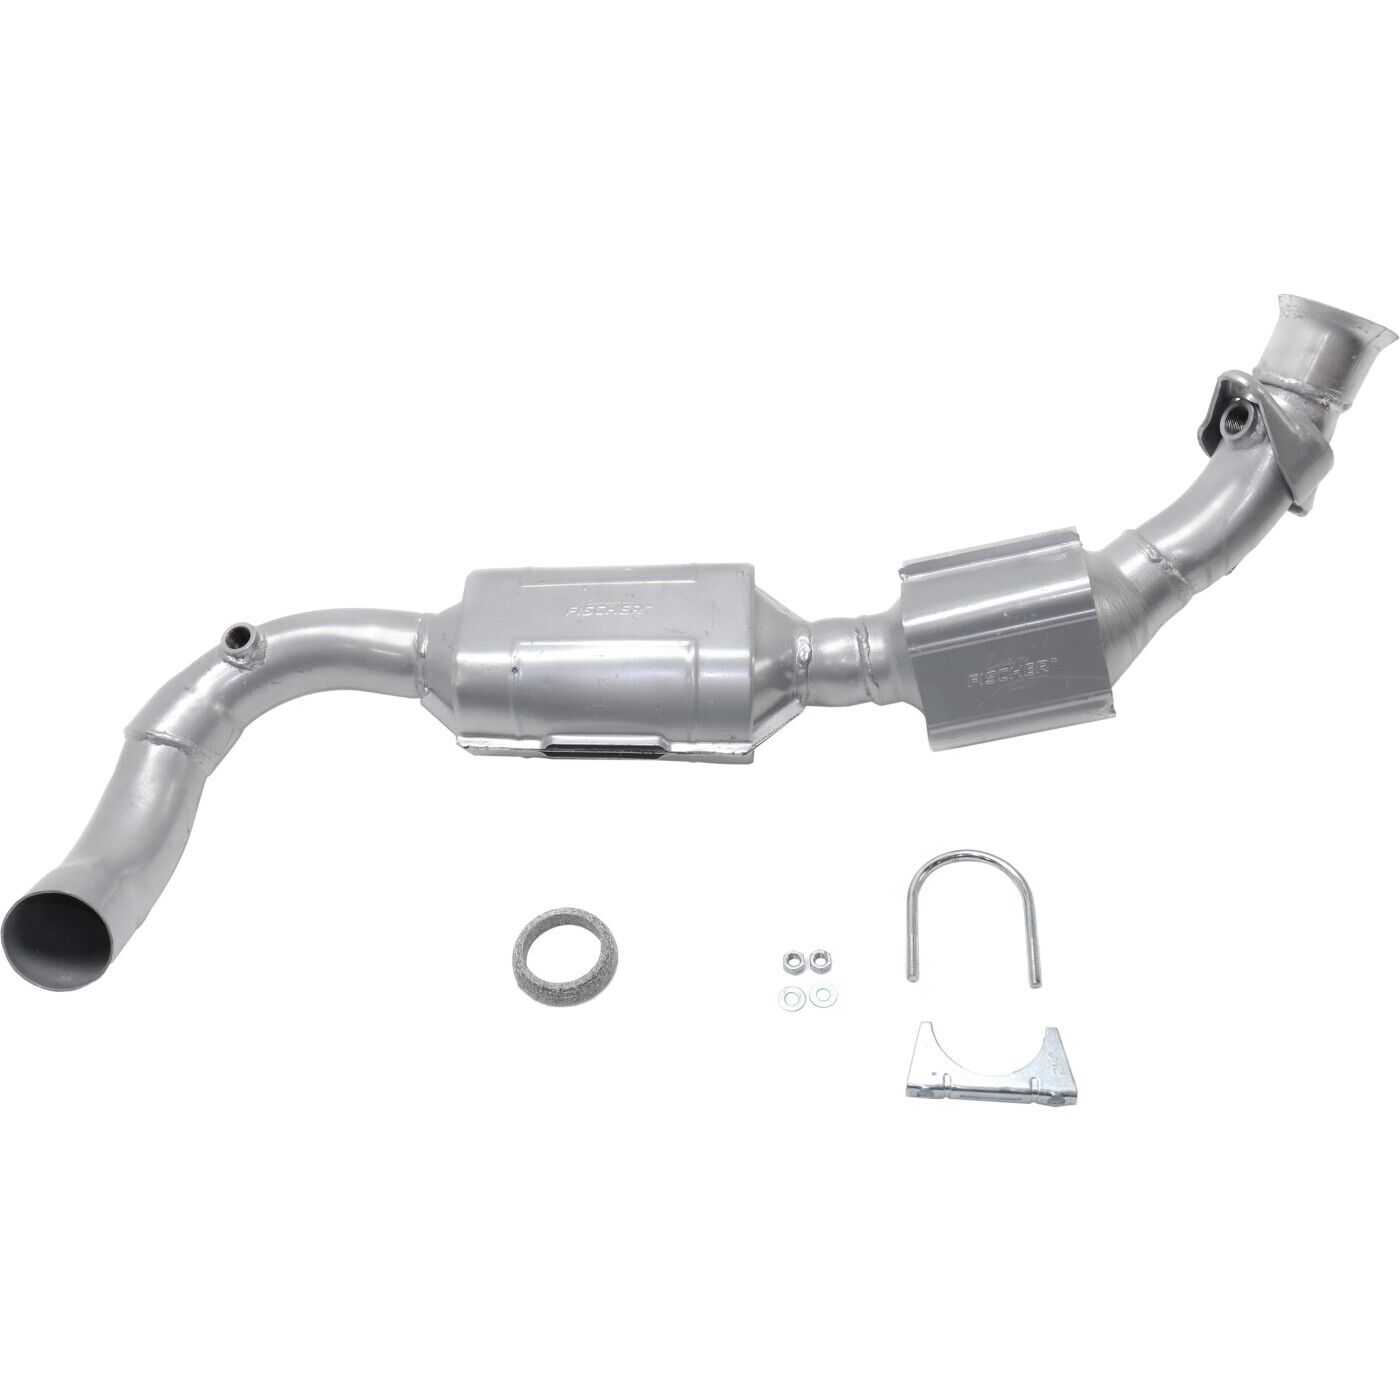 Driver Side Catalytic Converter 46-State Legal For 97-98 Ford F150 250 4WD 4.6L